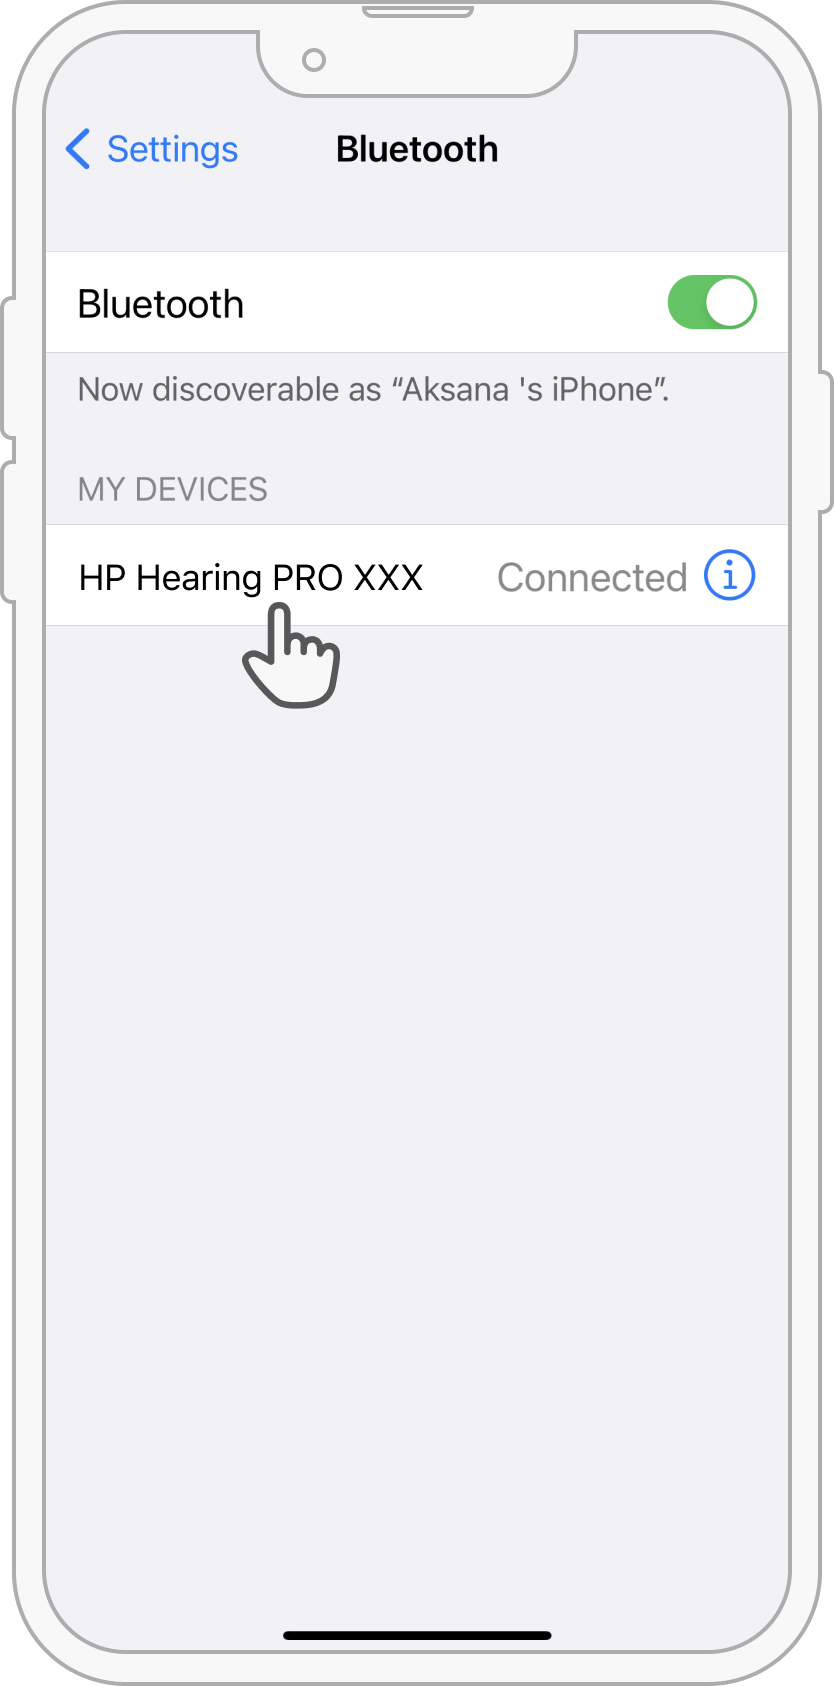 USR-SUP-002-32_-_HP_Hearing_PRO_Support_Asset_____Pairing_and_connecting_my_hearing_aids_-v1.0.png